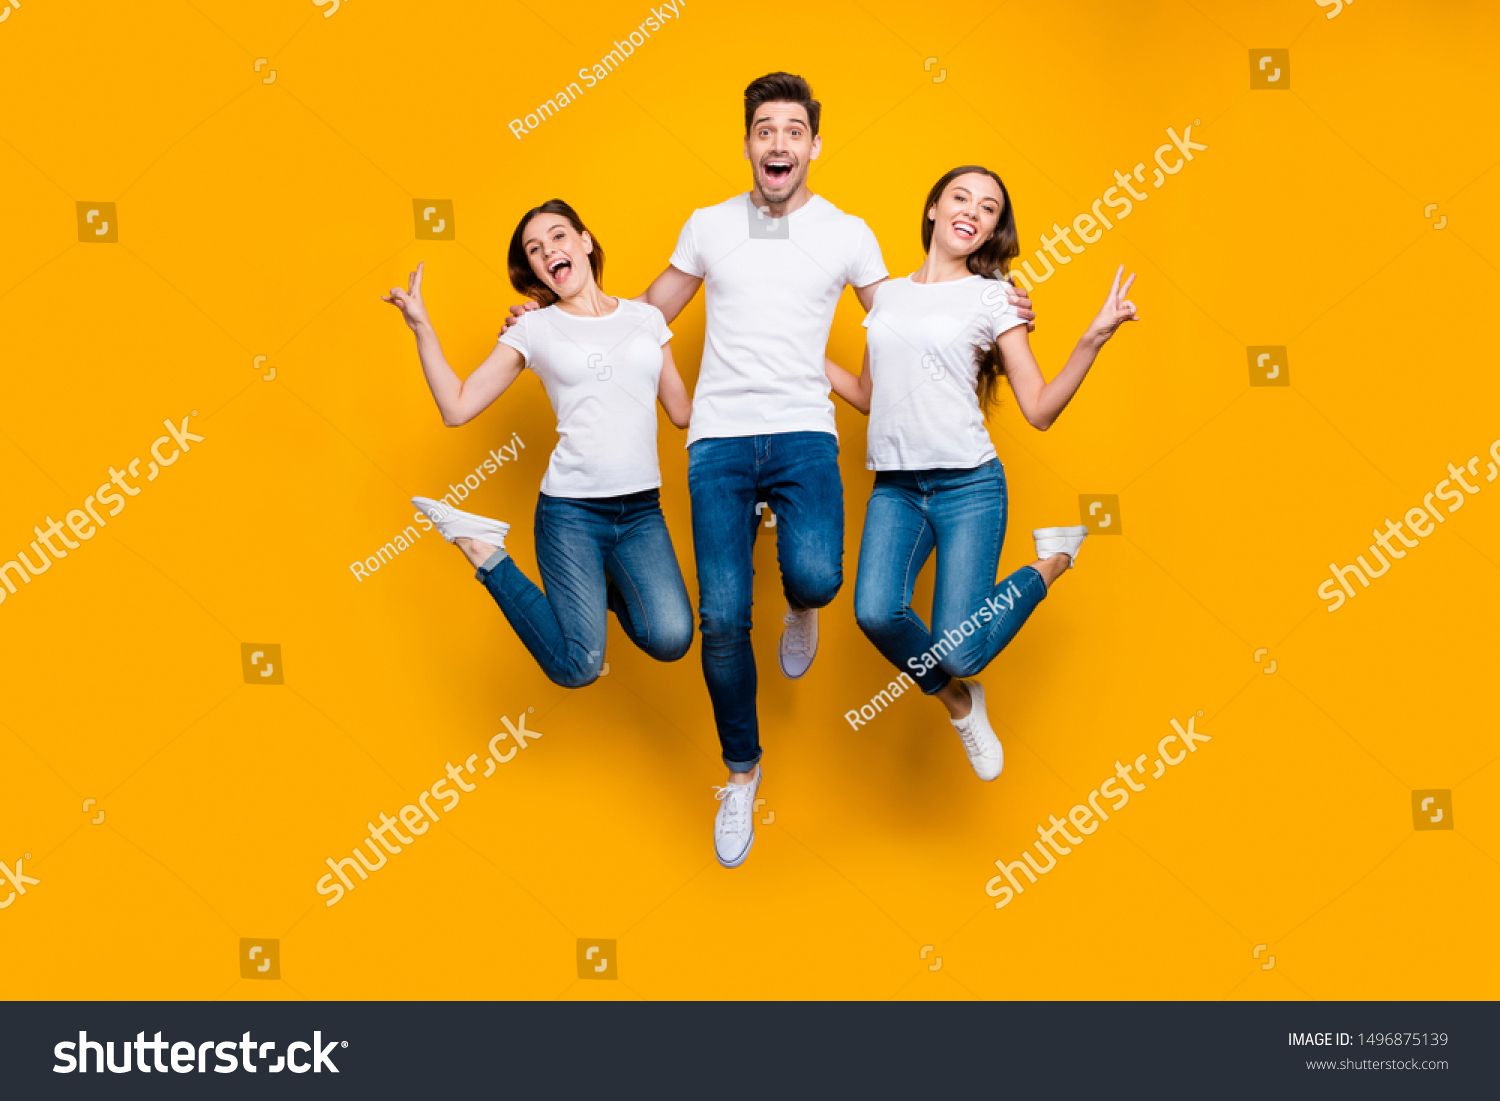 Full length body size view portrait of three nice attractive slim fit cheerful cheery person buddy fellow having fun showing v-sign isolated over bright vivid shine yellow background #1496875139